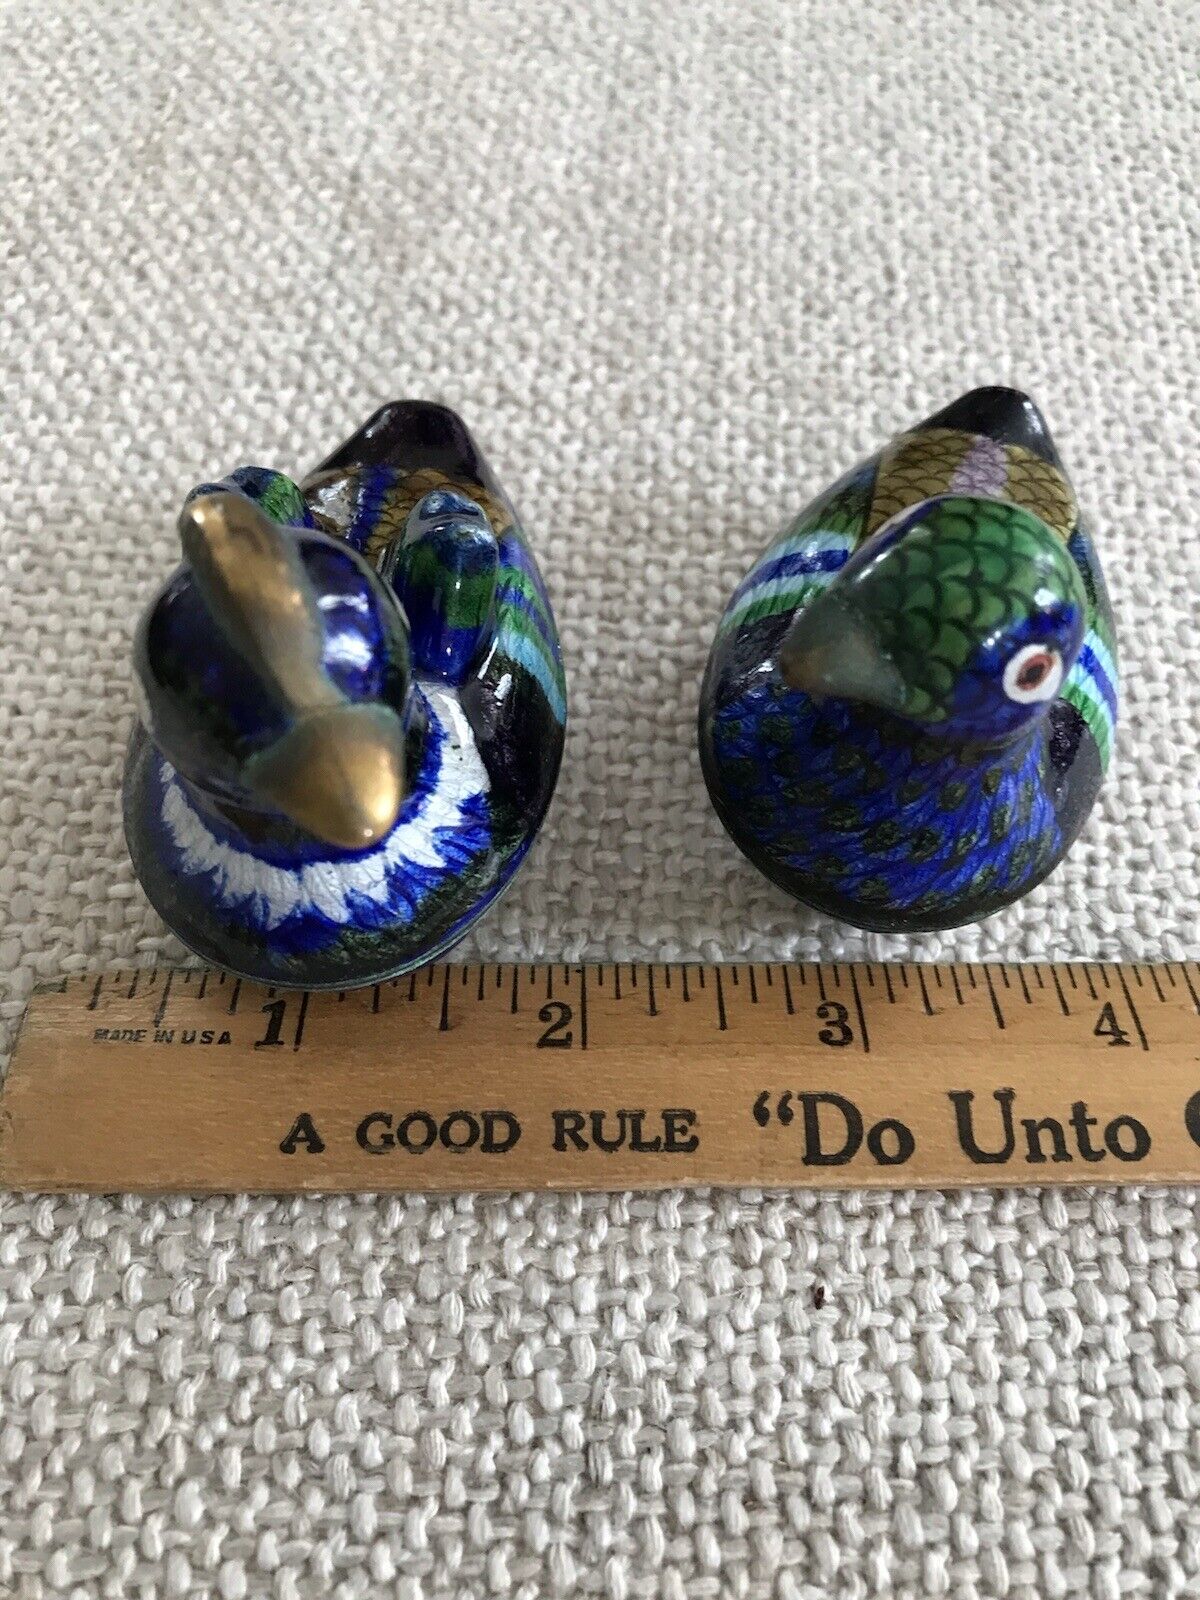 PAIR OF CLOISONNE ENAMEL DUCK TRINKET BOXES With Blue Interiors - China Без бренда - фотография #3